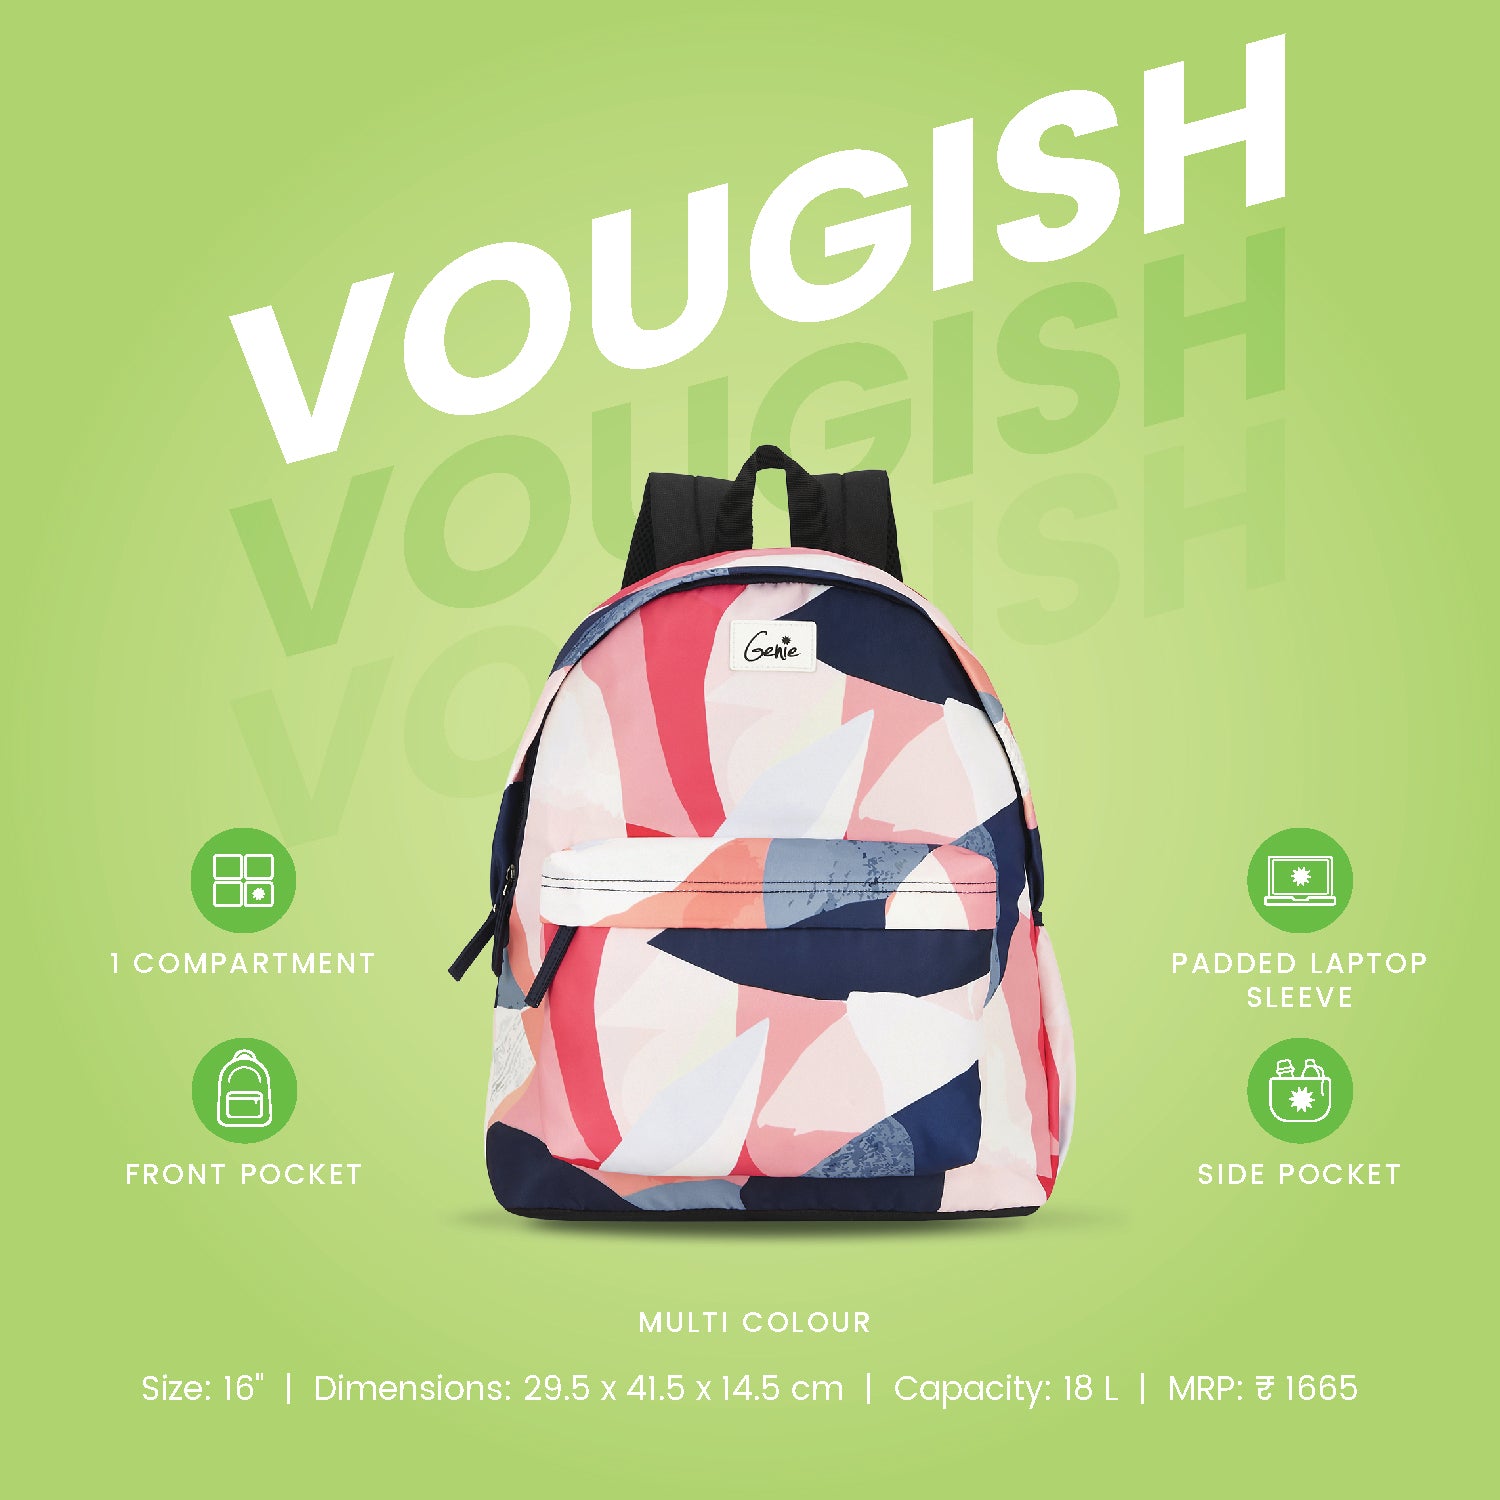 Genie Vougish 18L Multicolor Casual Backpack With Easy Access Pockets